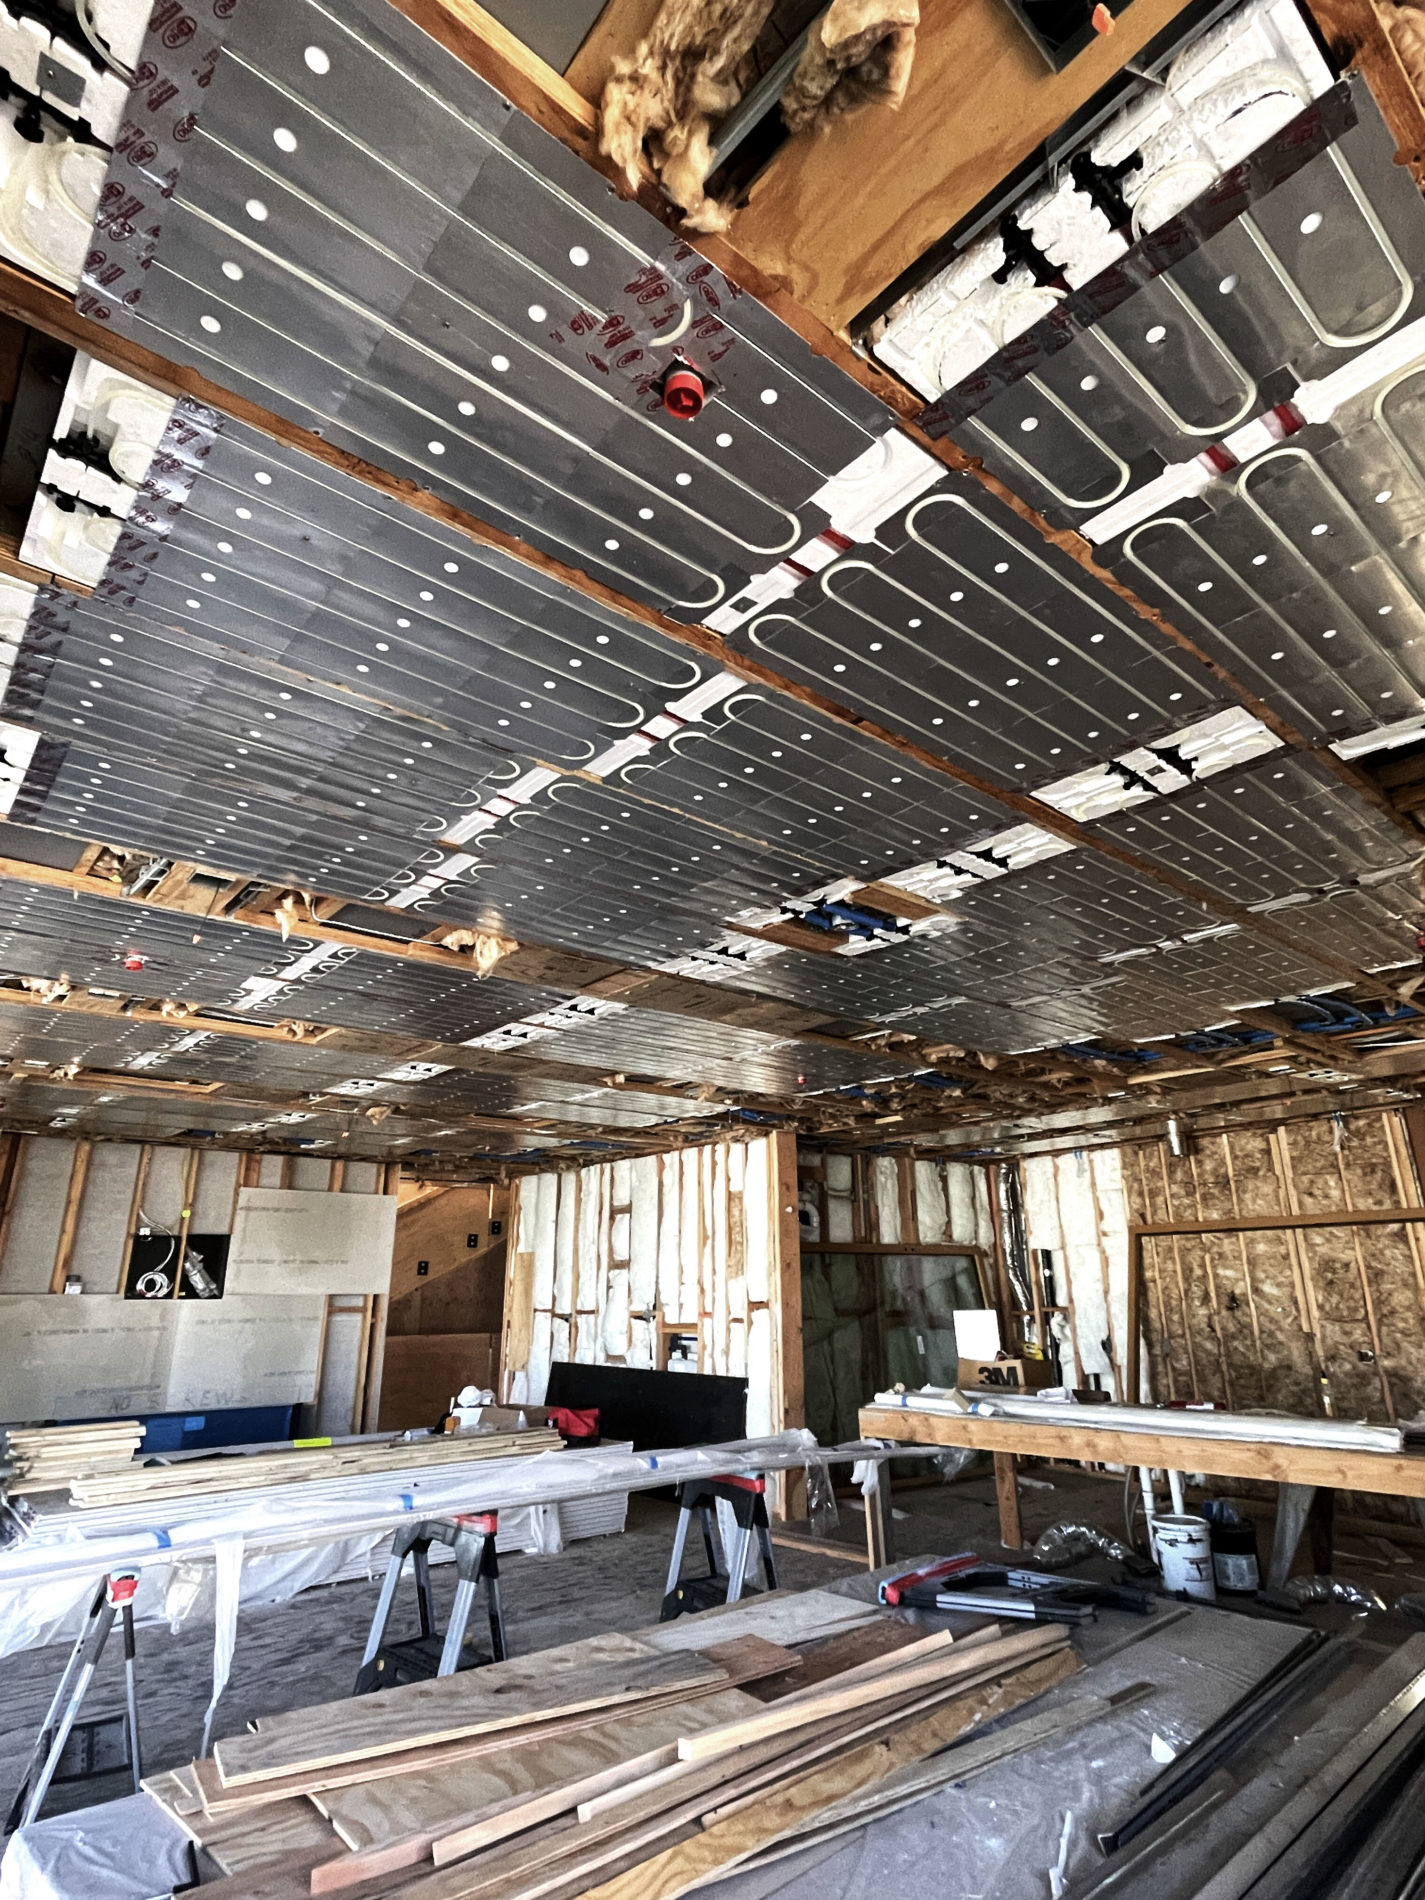 2x8 Ray Magic® radiant ceiling panels installed by Mayo Mechanical to provide radiant cooling!